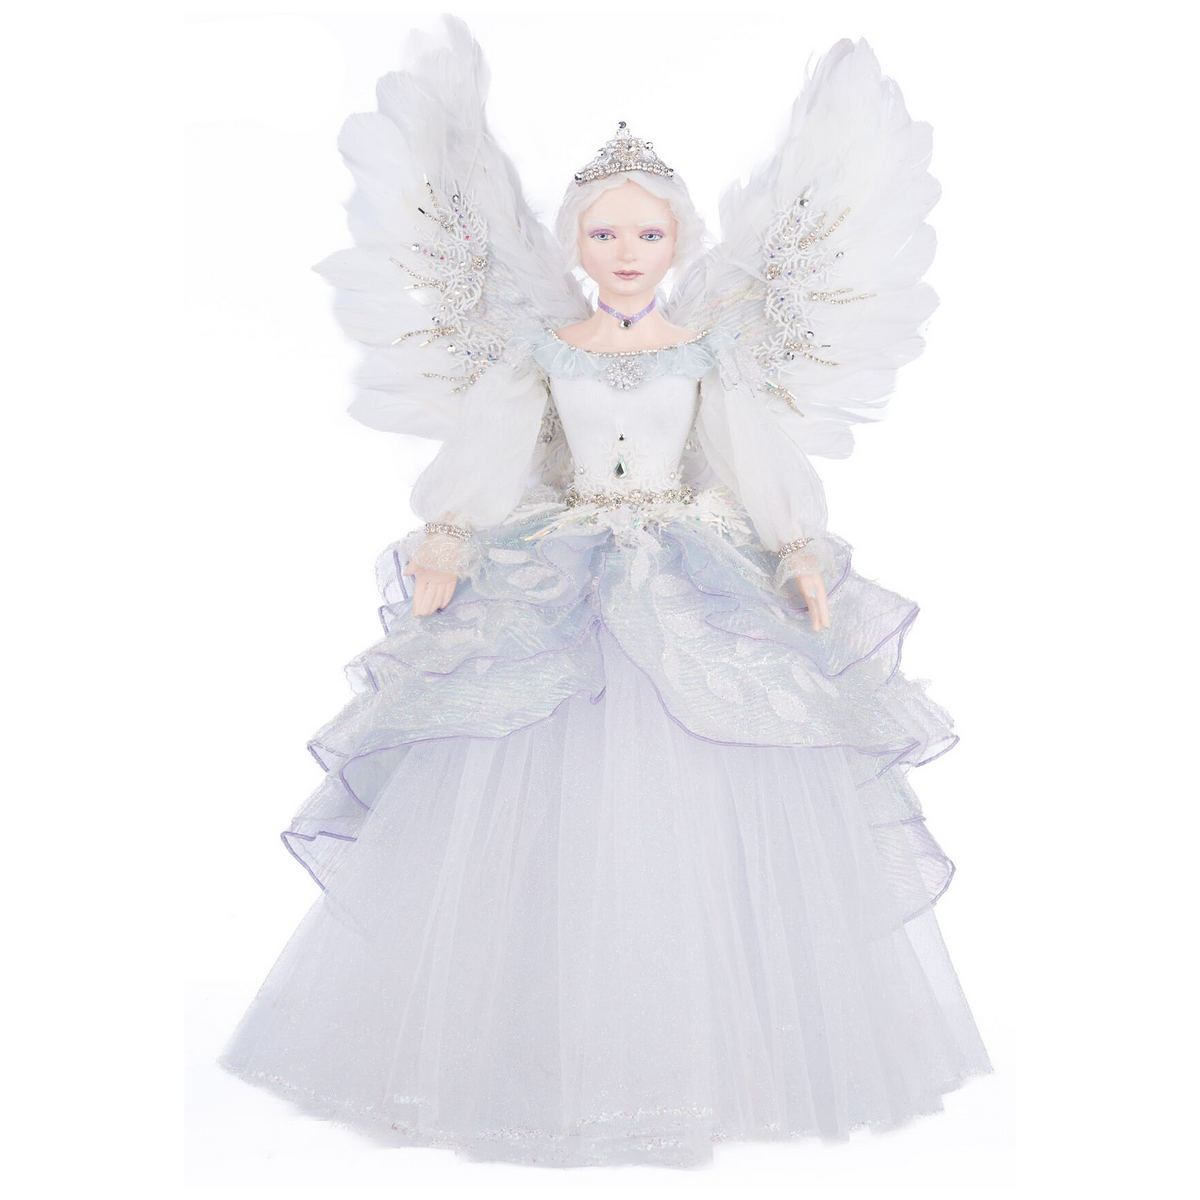 Katherine's Collection Crystalline Angel Tree Topper